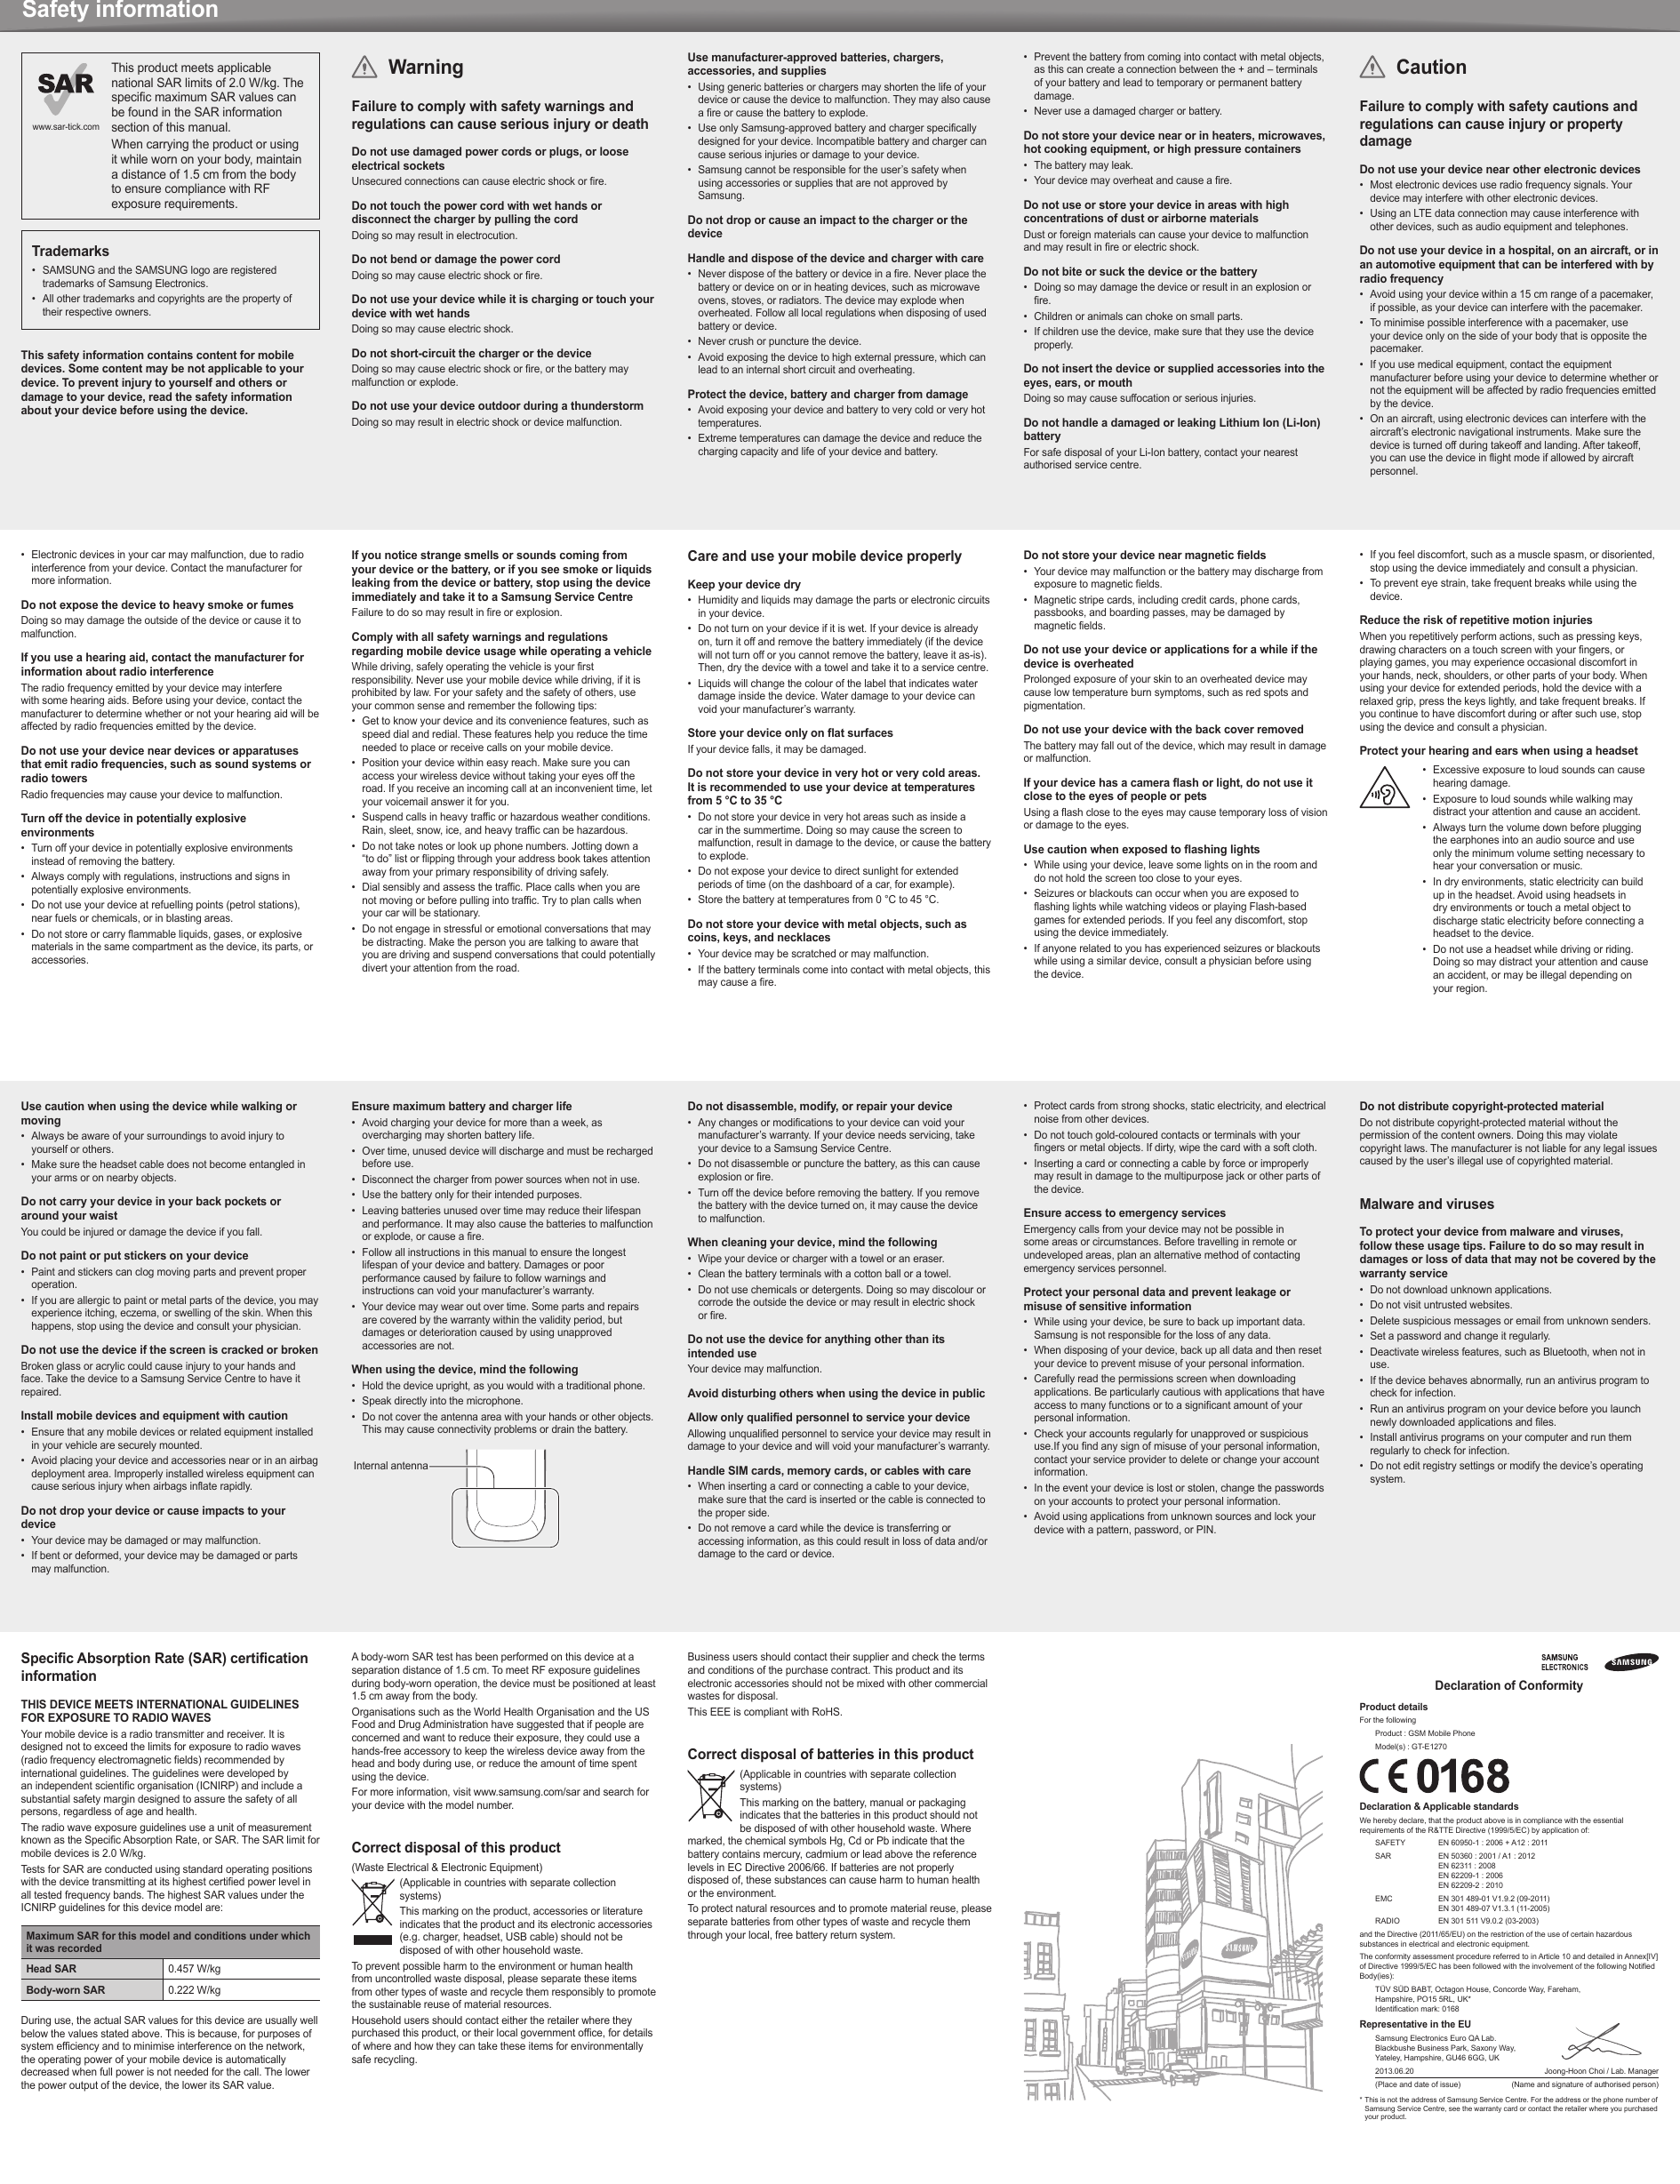 Page 2 of 2 - Samsung Samsung-Gt-E1270-Users-Manual-  Samsung-gt-e1270-users-manual